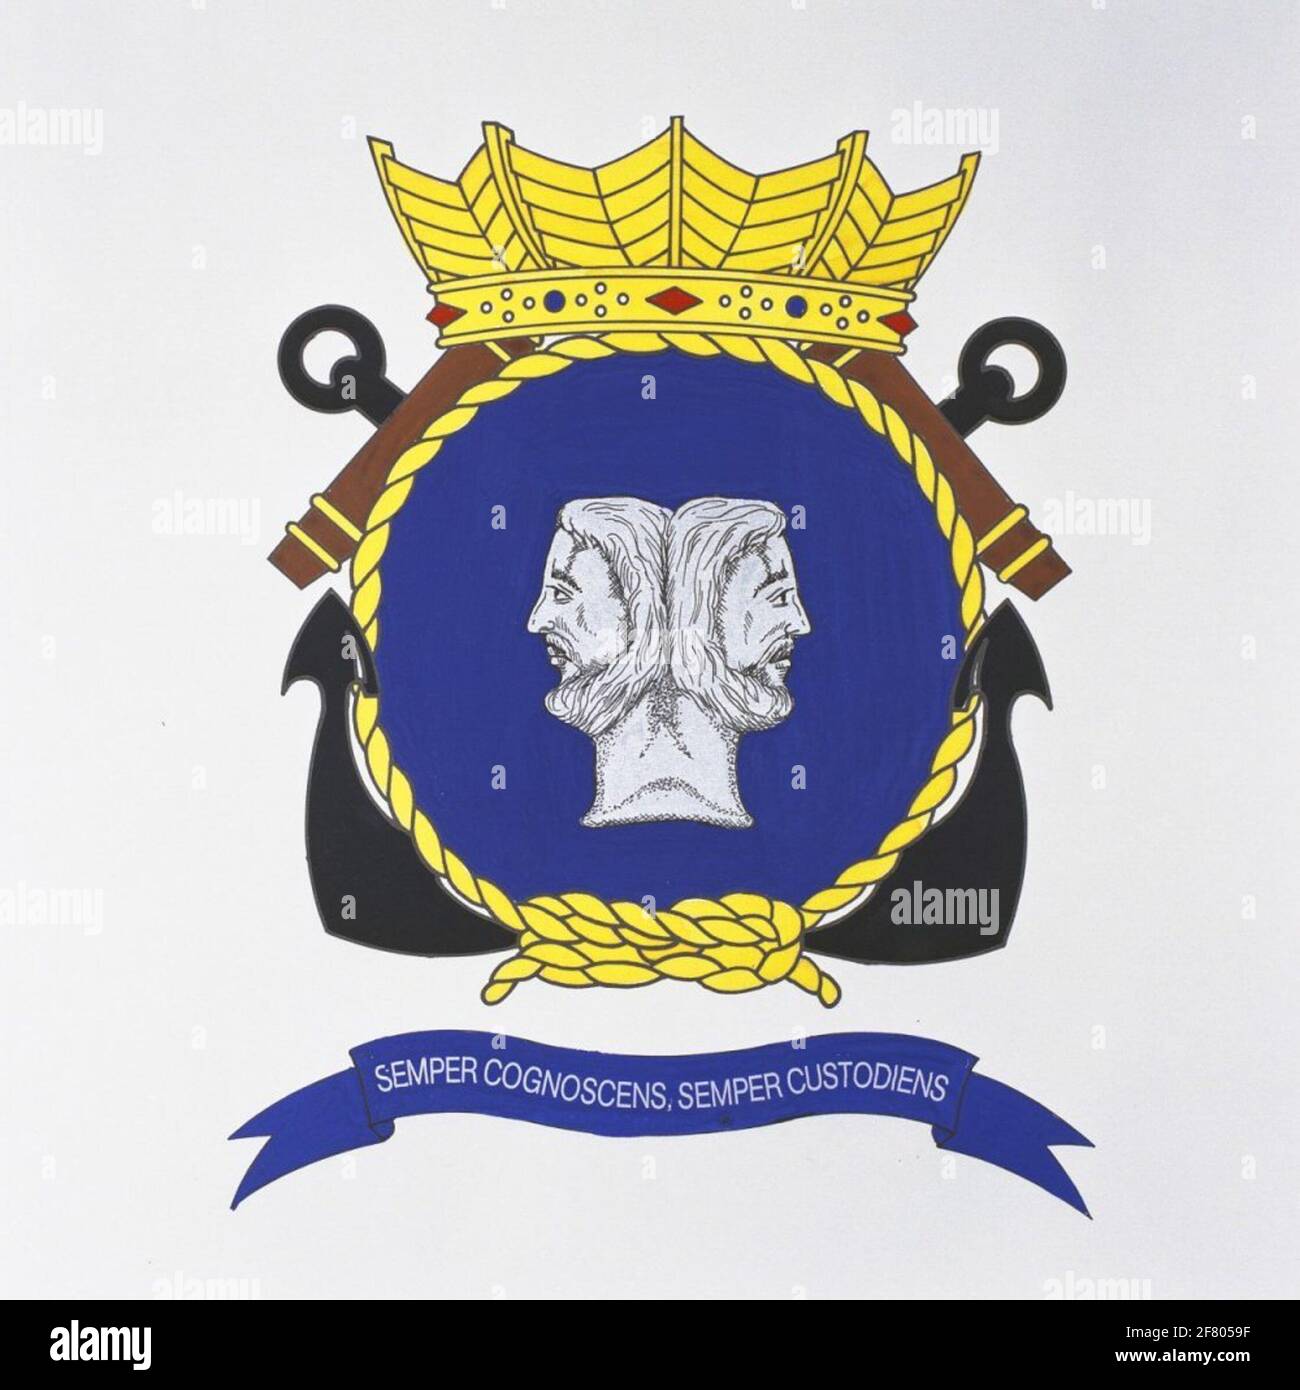 Marine Intelligence Service (Marid) / Military Intelligence Service Royal Navy (MIDKM). The Roman God Janus symbolizes the past and the future. In wartime, the Roman people stated under its protection, awaiting a new time of peace and a safe return of the force. Logo shield and the spell: Semper cognoscens, Semper Custodiens (always permanently, always conservative) refer to the work of the Marid. Stock Photo